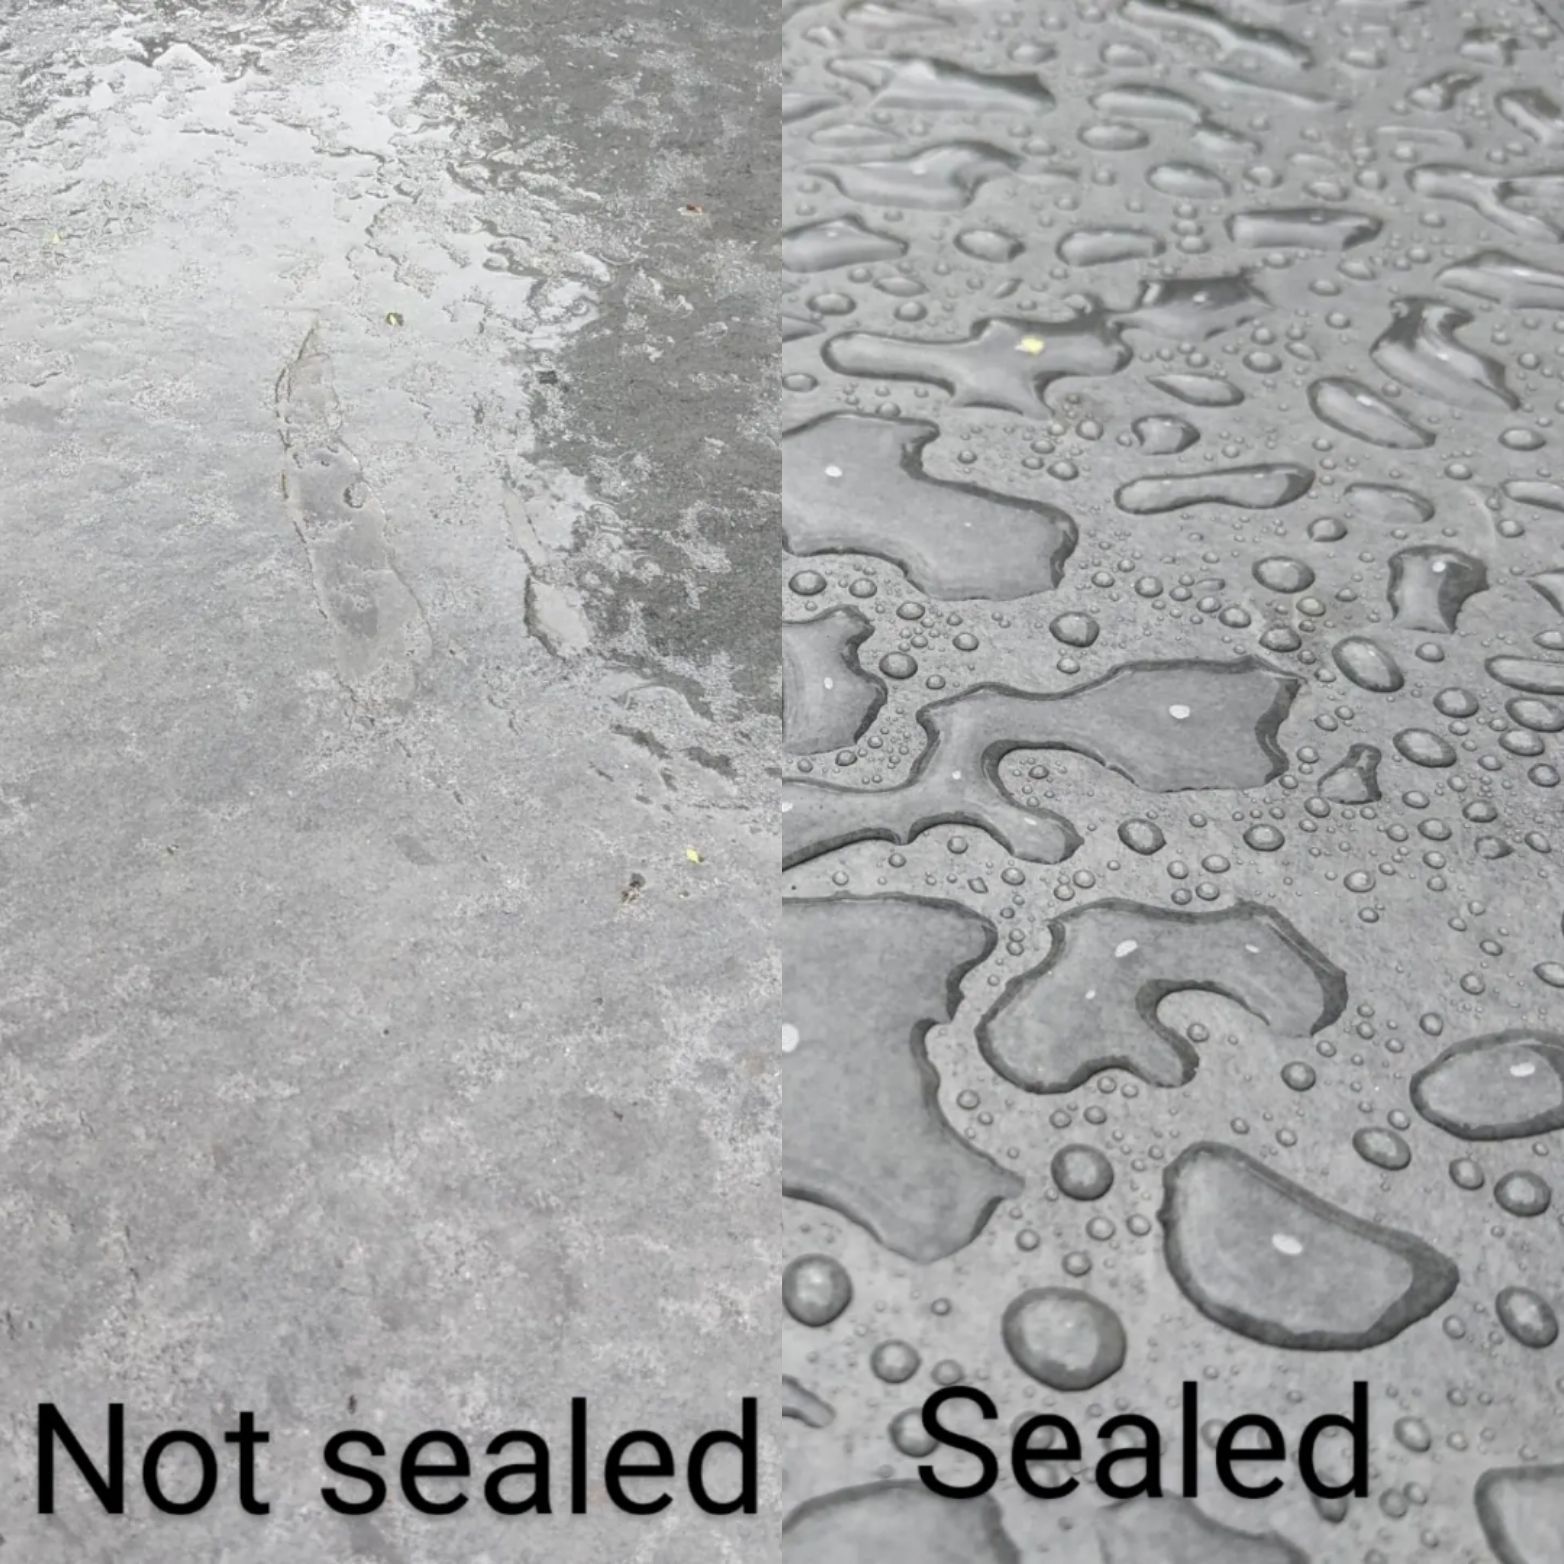 Sealed vs not sealed - why sealing is important for your tiles and grout?